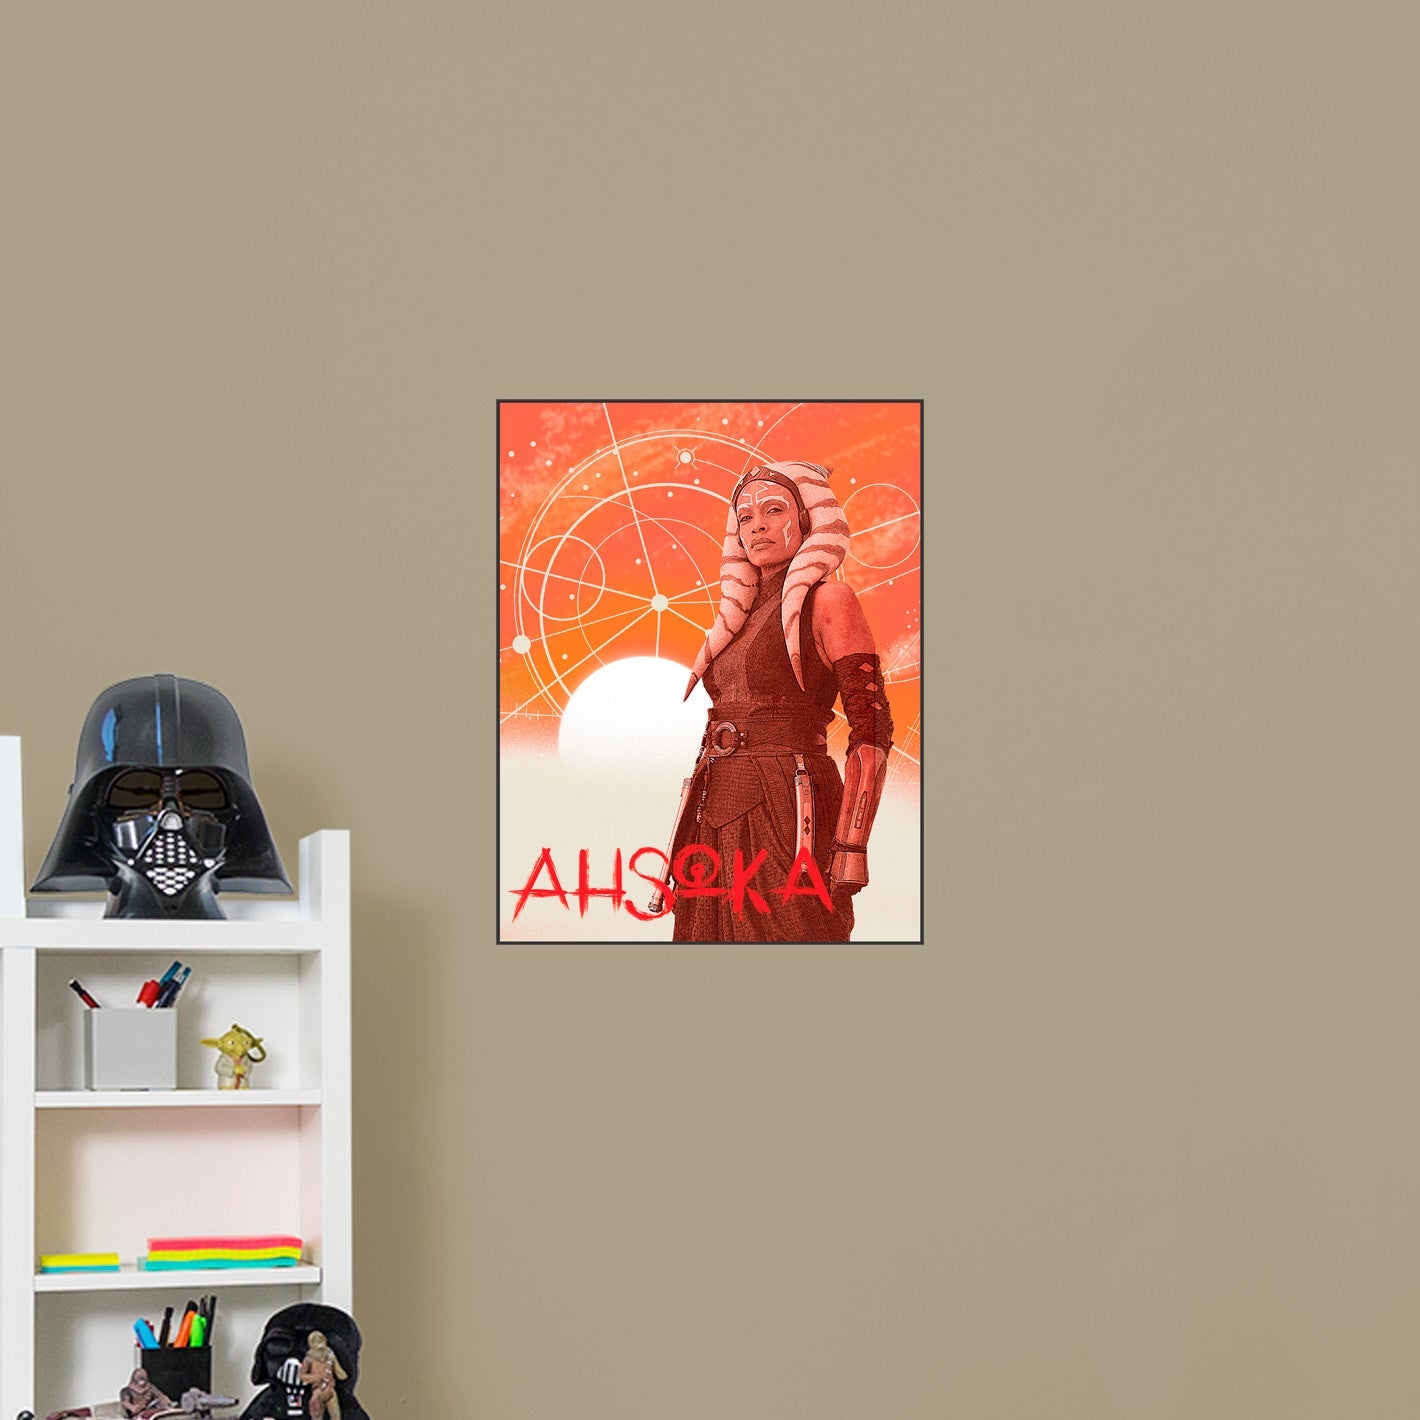 Ahsoka: Ahsoka Tano Brush Lettering Poster        - Officially Licensed Star Wars Removable     Adhesive Decal